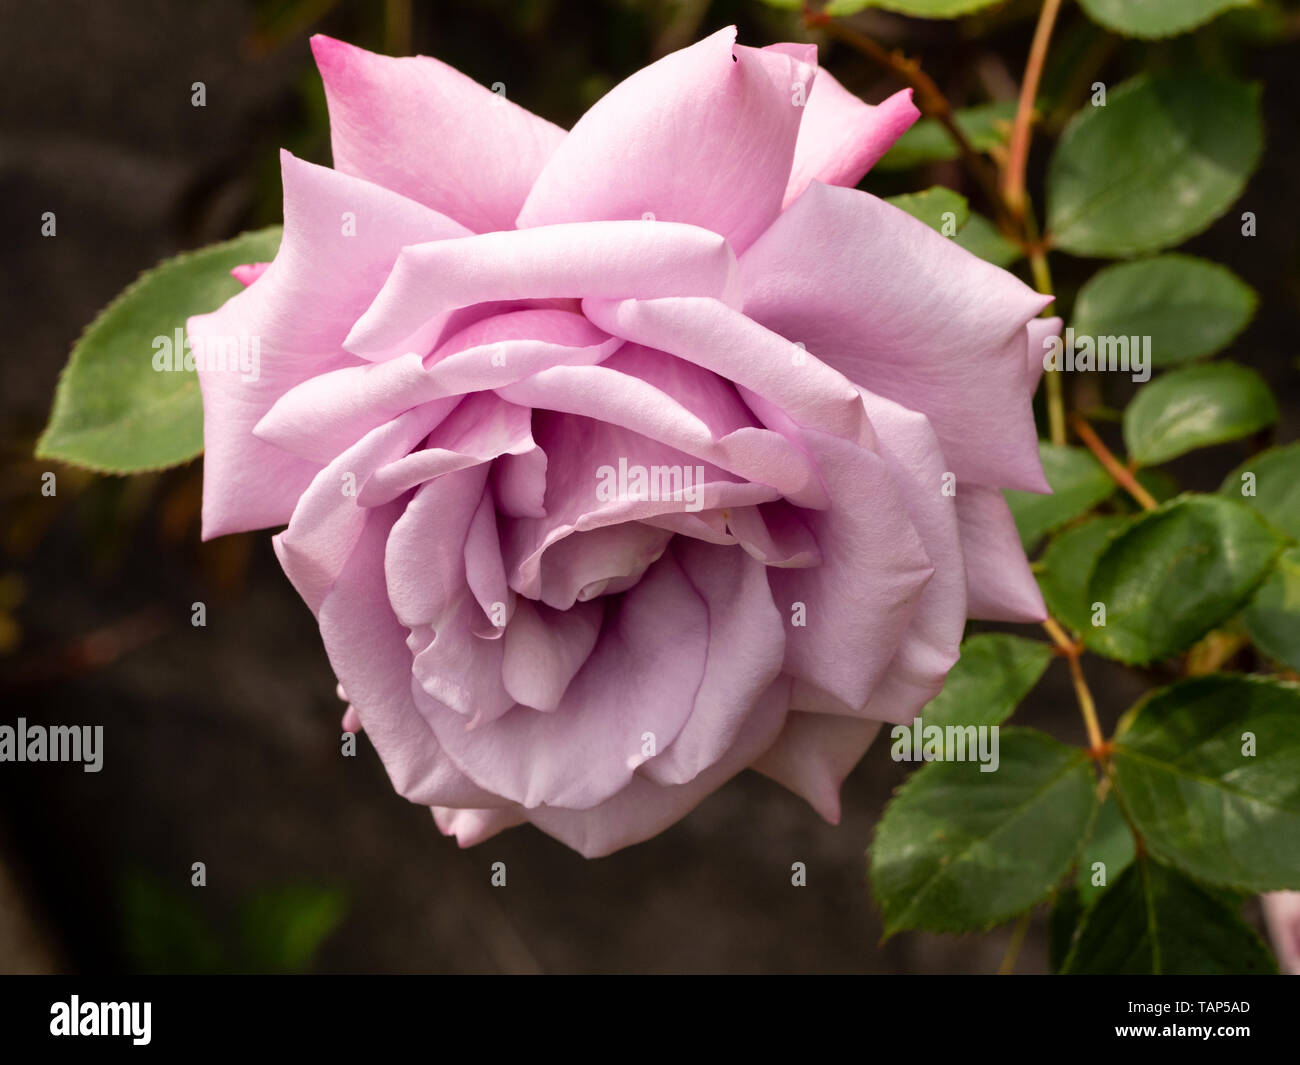 Single flower of the silvery-lilac hybrid tea rose, Rosa 'Twice in a Blue Moon' Stock Photo